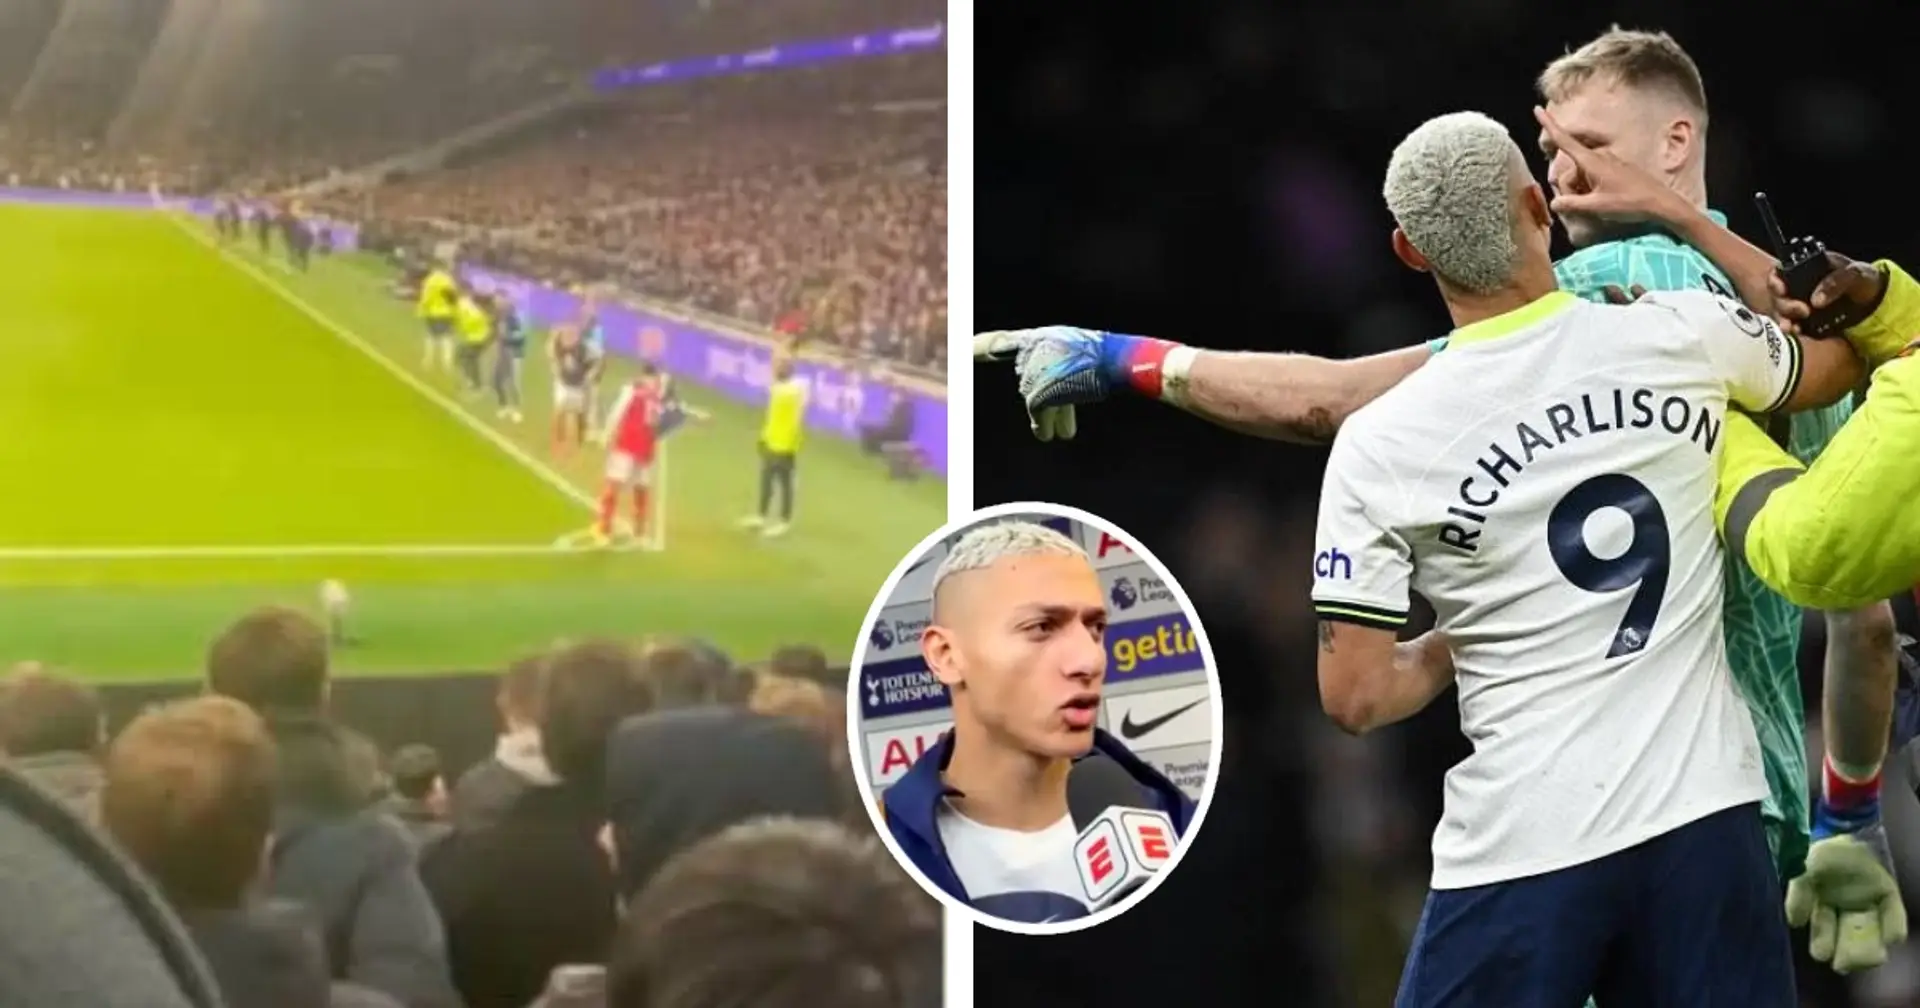 Richarlison: I didn't shake Martinelli's hand, Ramsdale disrespected our fans